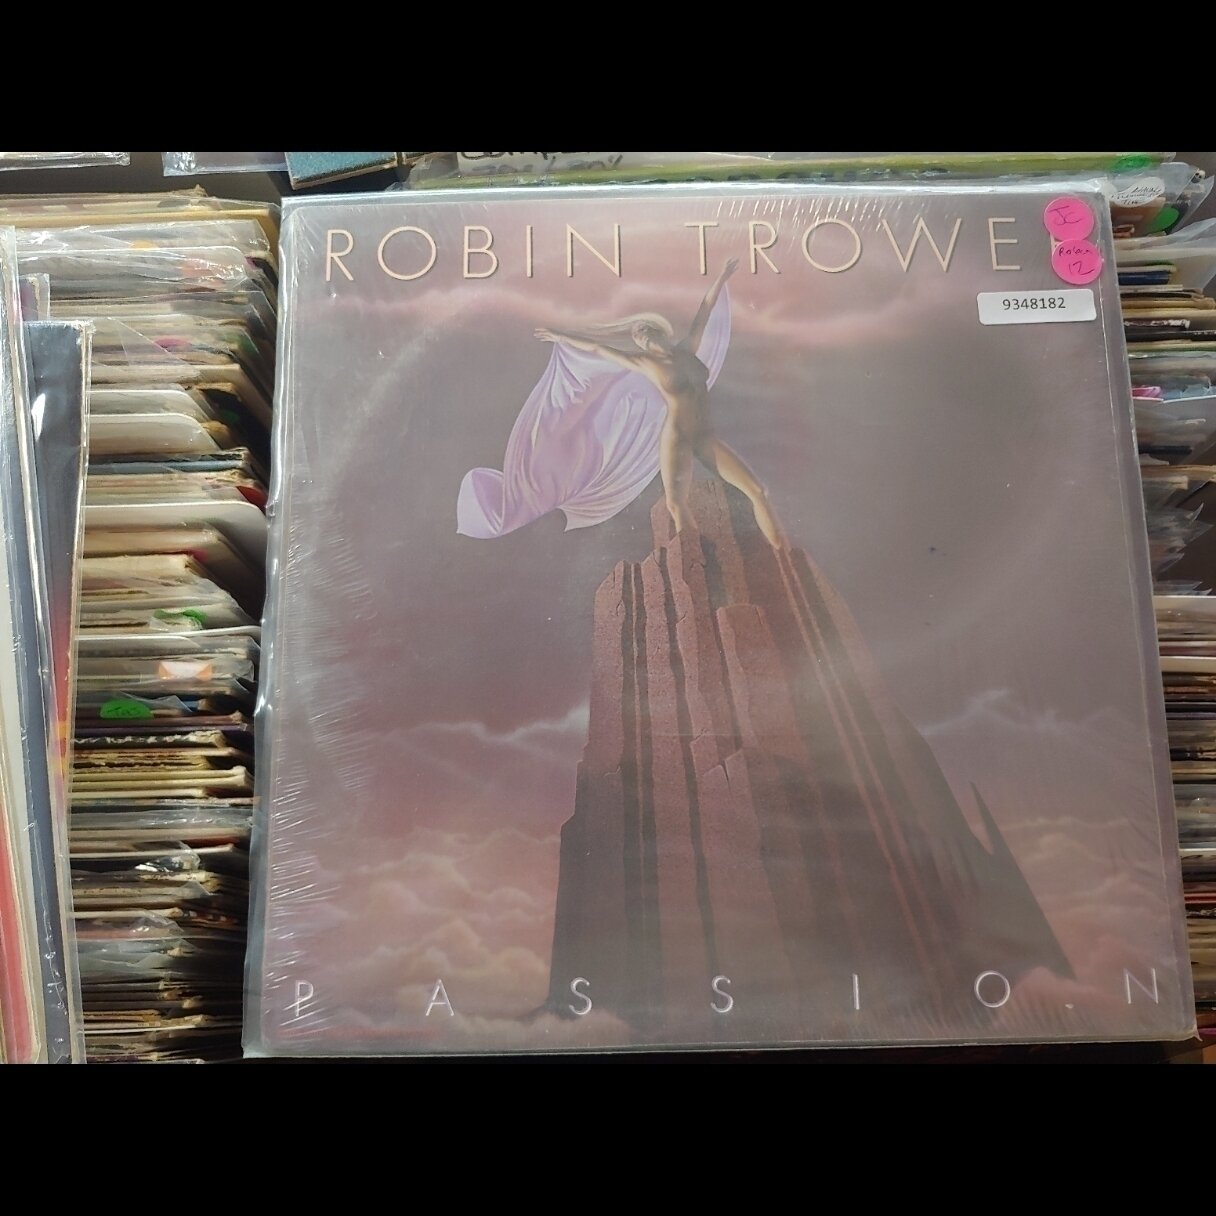 Trower, Robin - Passion